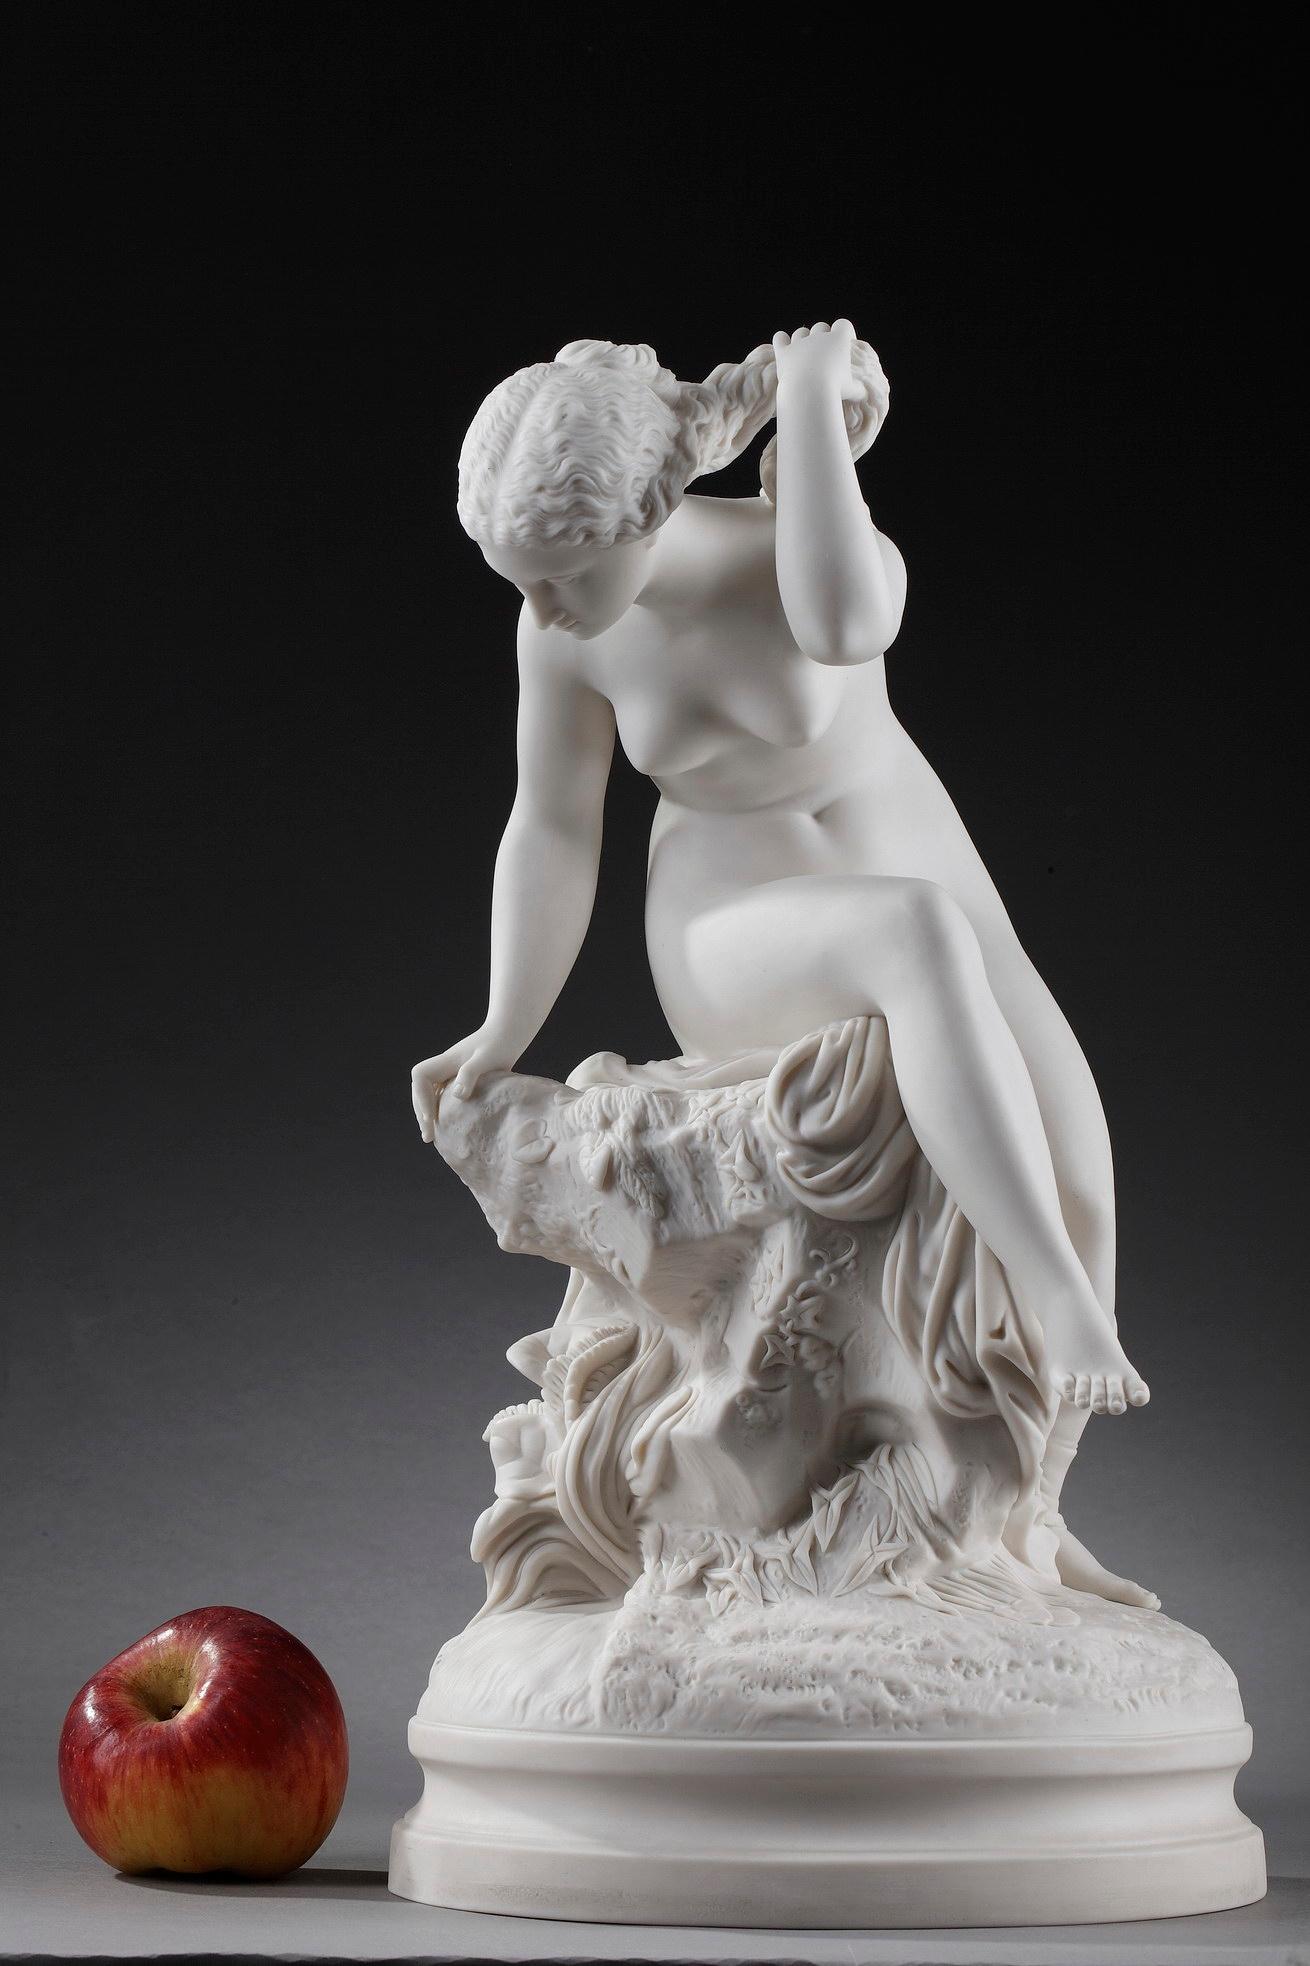 Art nouveau-period bisque porcelain figurine in the taste of Sevres, featuring a naked bather sitting on a rock, richly covered with plants. She seems to look at her reflection in the water while gracefully raising her hair on her neck. Perfectly